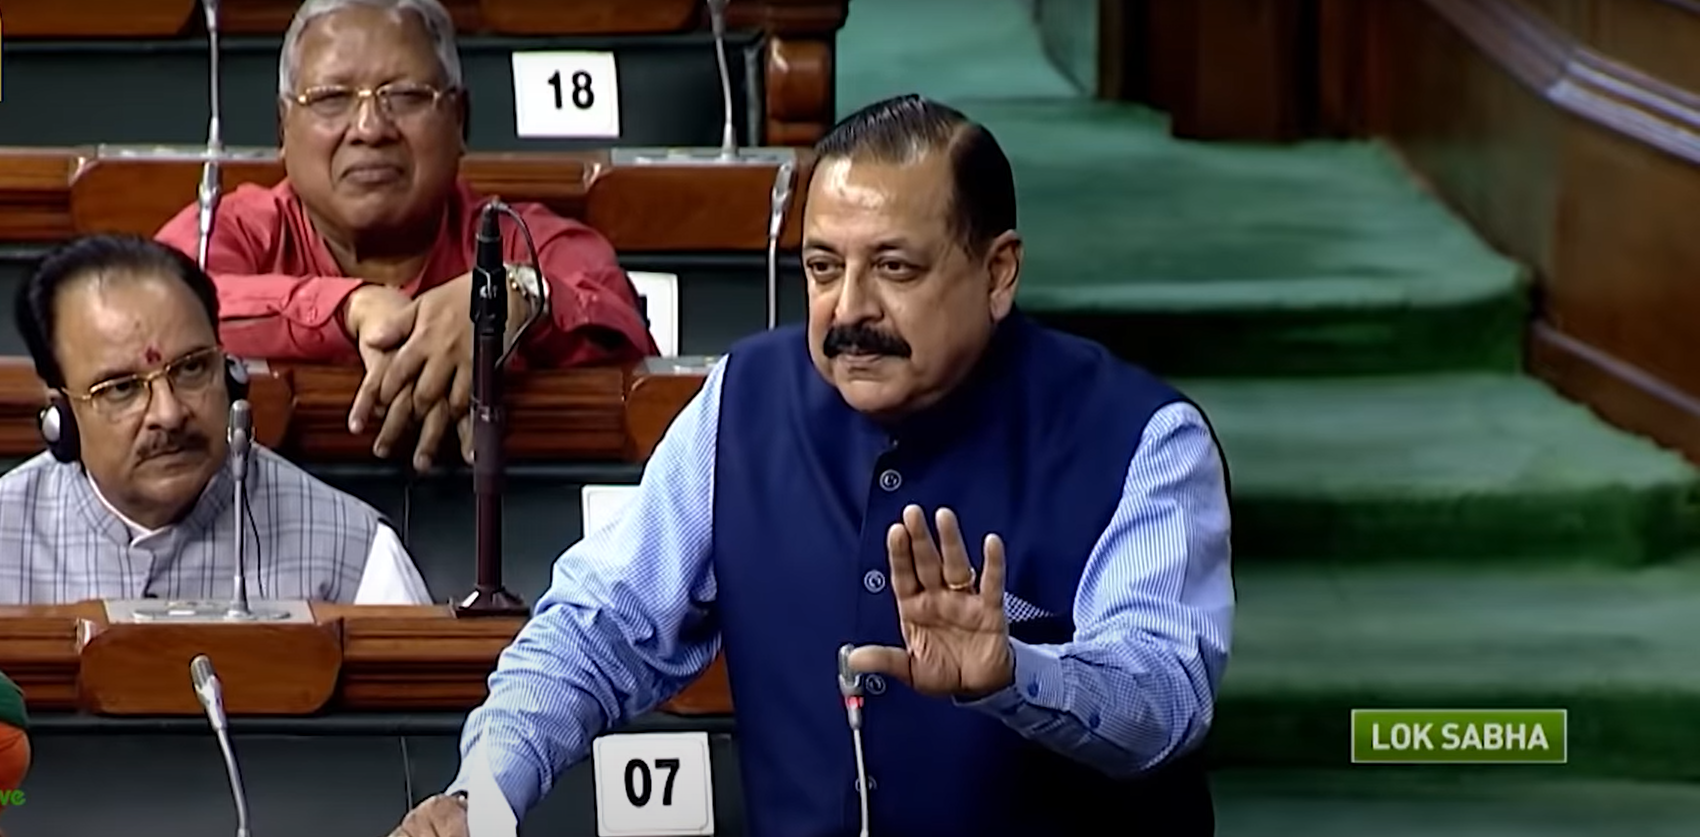 Modi government has recruited nearly 2 lakh candidates for government jobs in the last five years: Union Minister Jitendra Singh in Parliament.